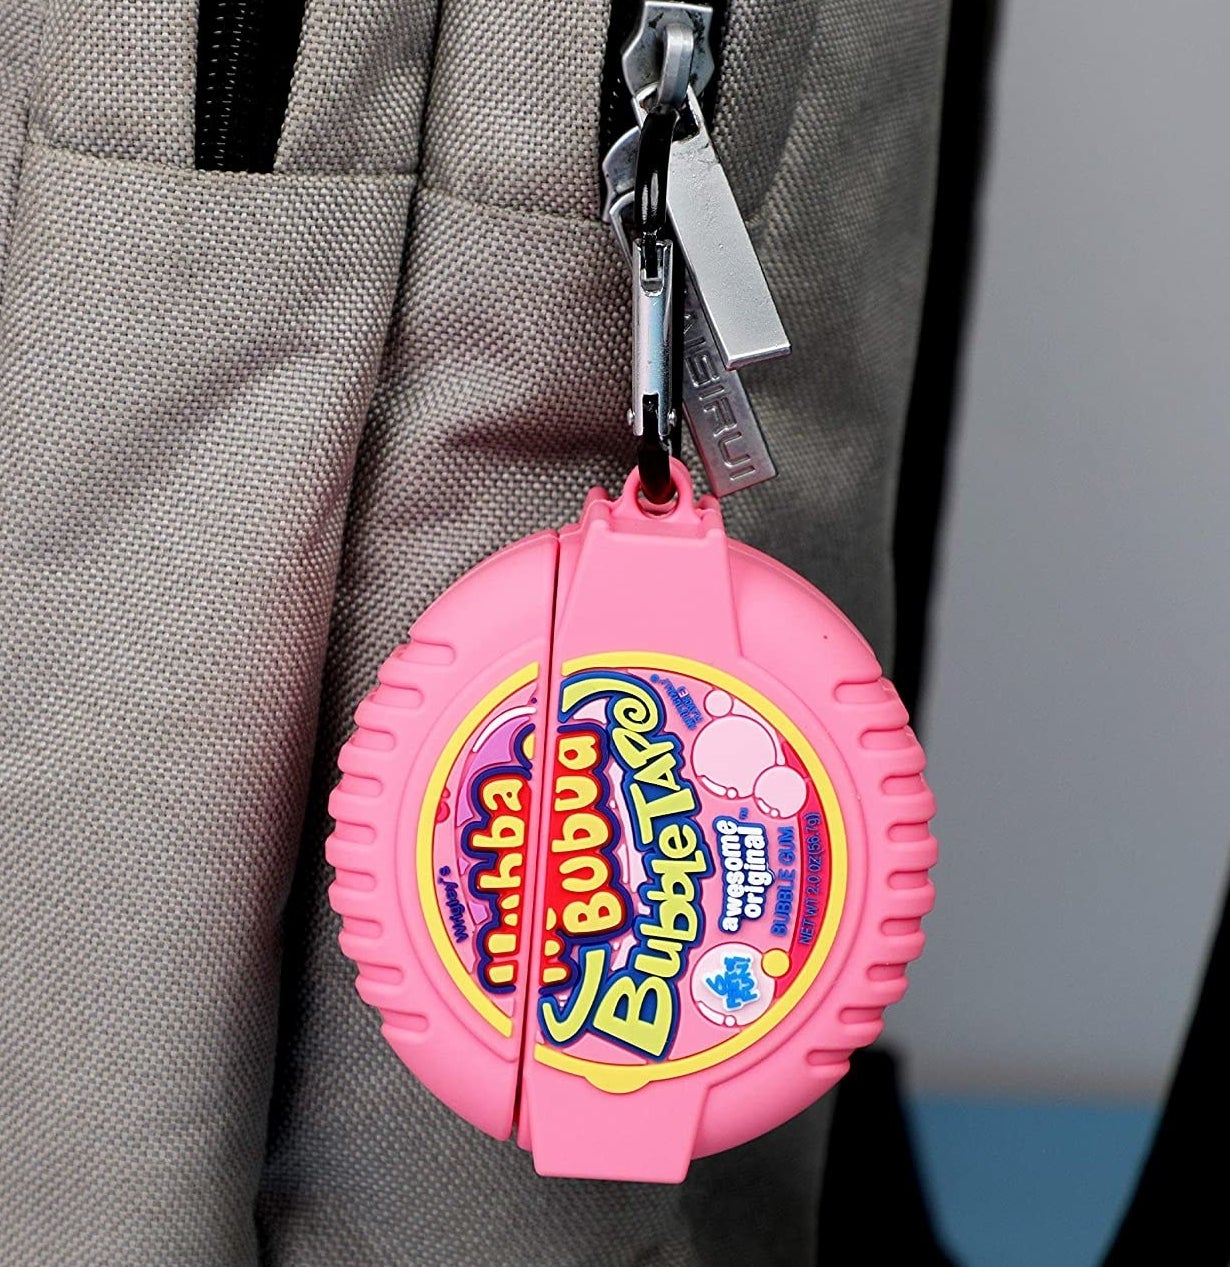 the bubblegum AirPods Case hanging from a backpack